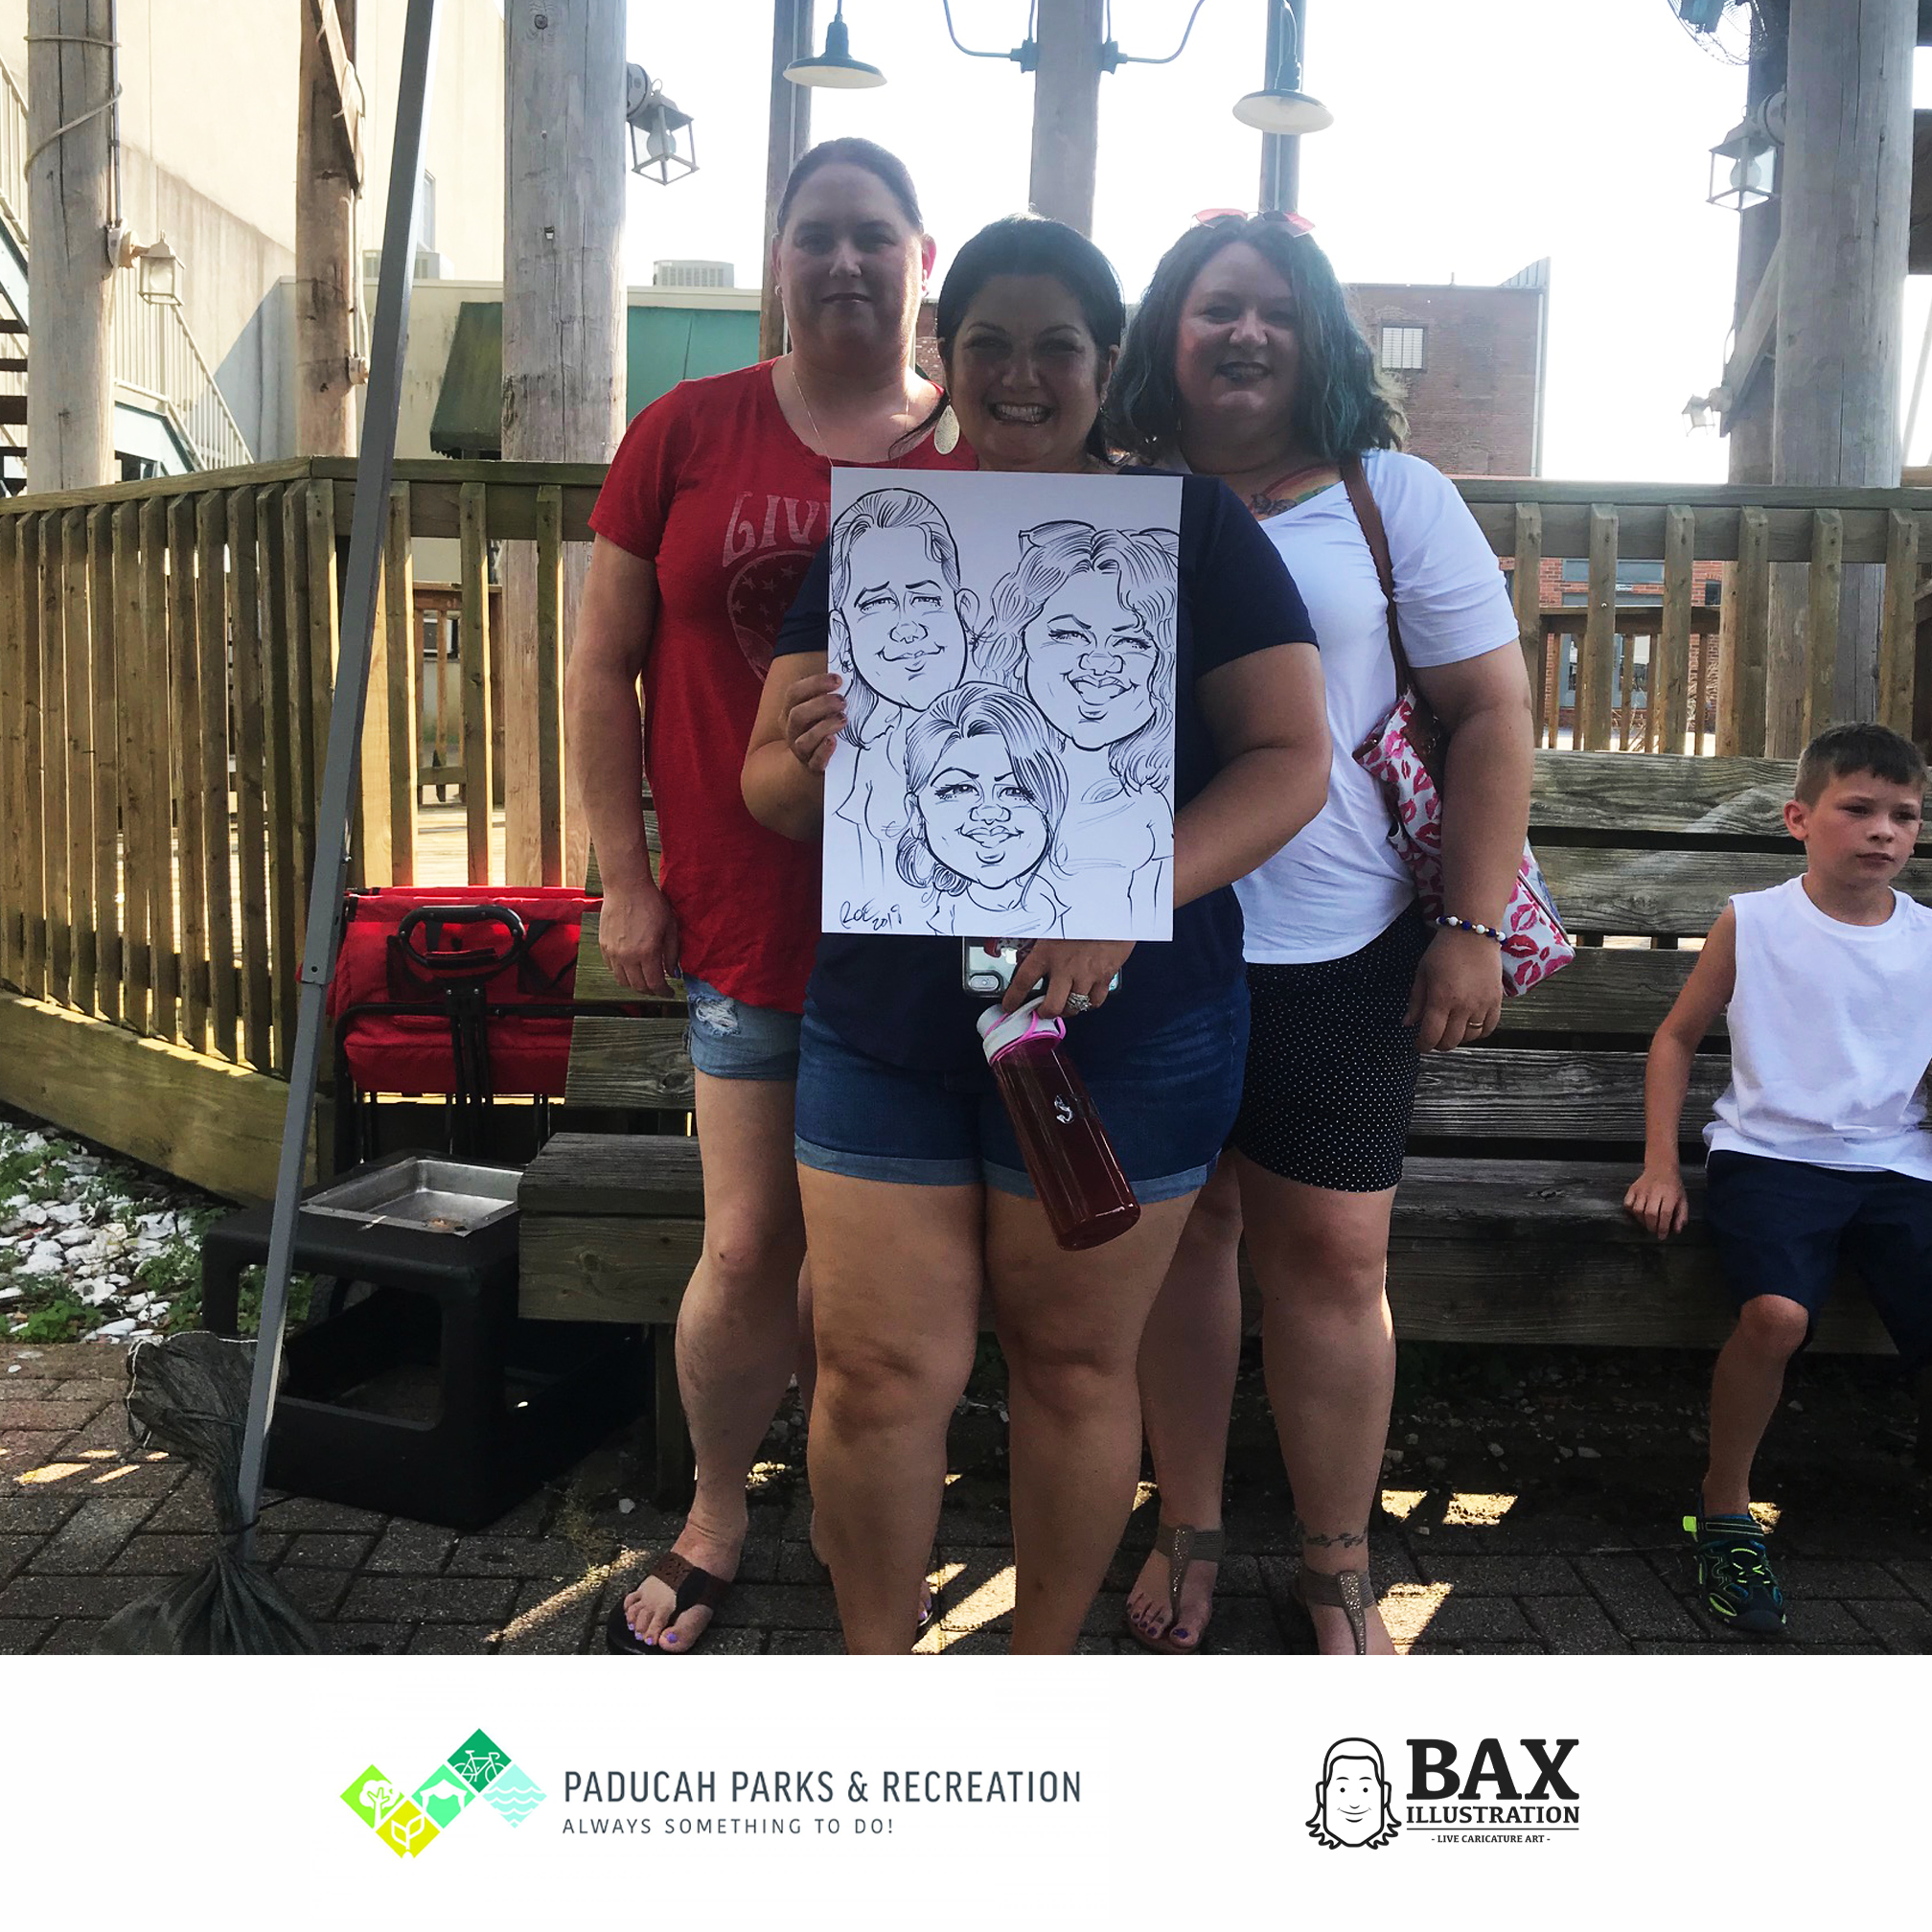 Girls holding caricature by Bax Illustration in Paducah Kentucky at the 2019 Independence Day Celebration